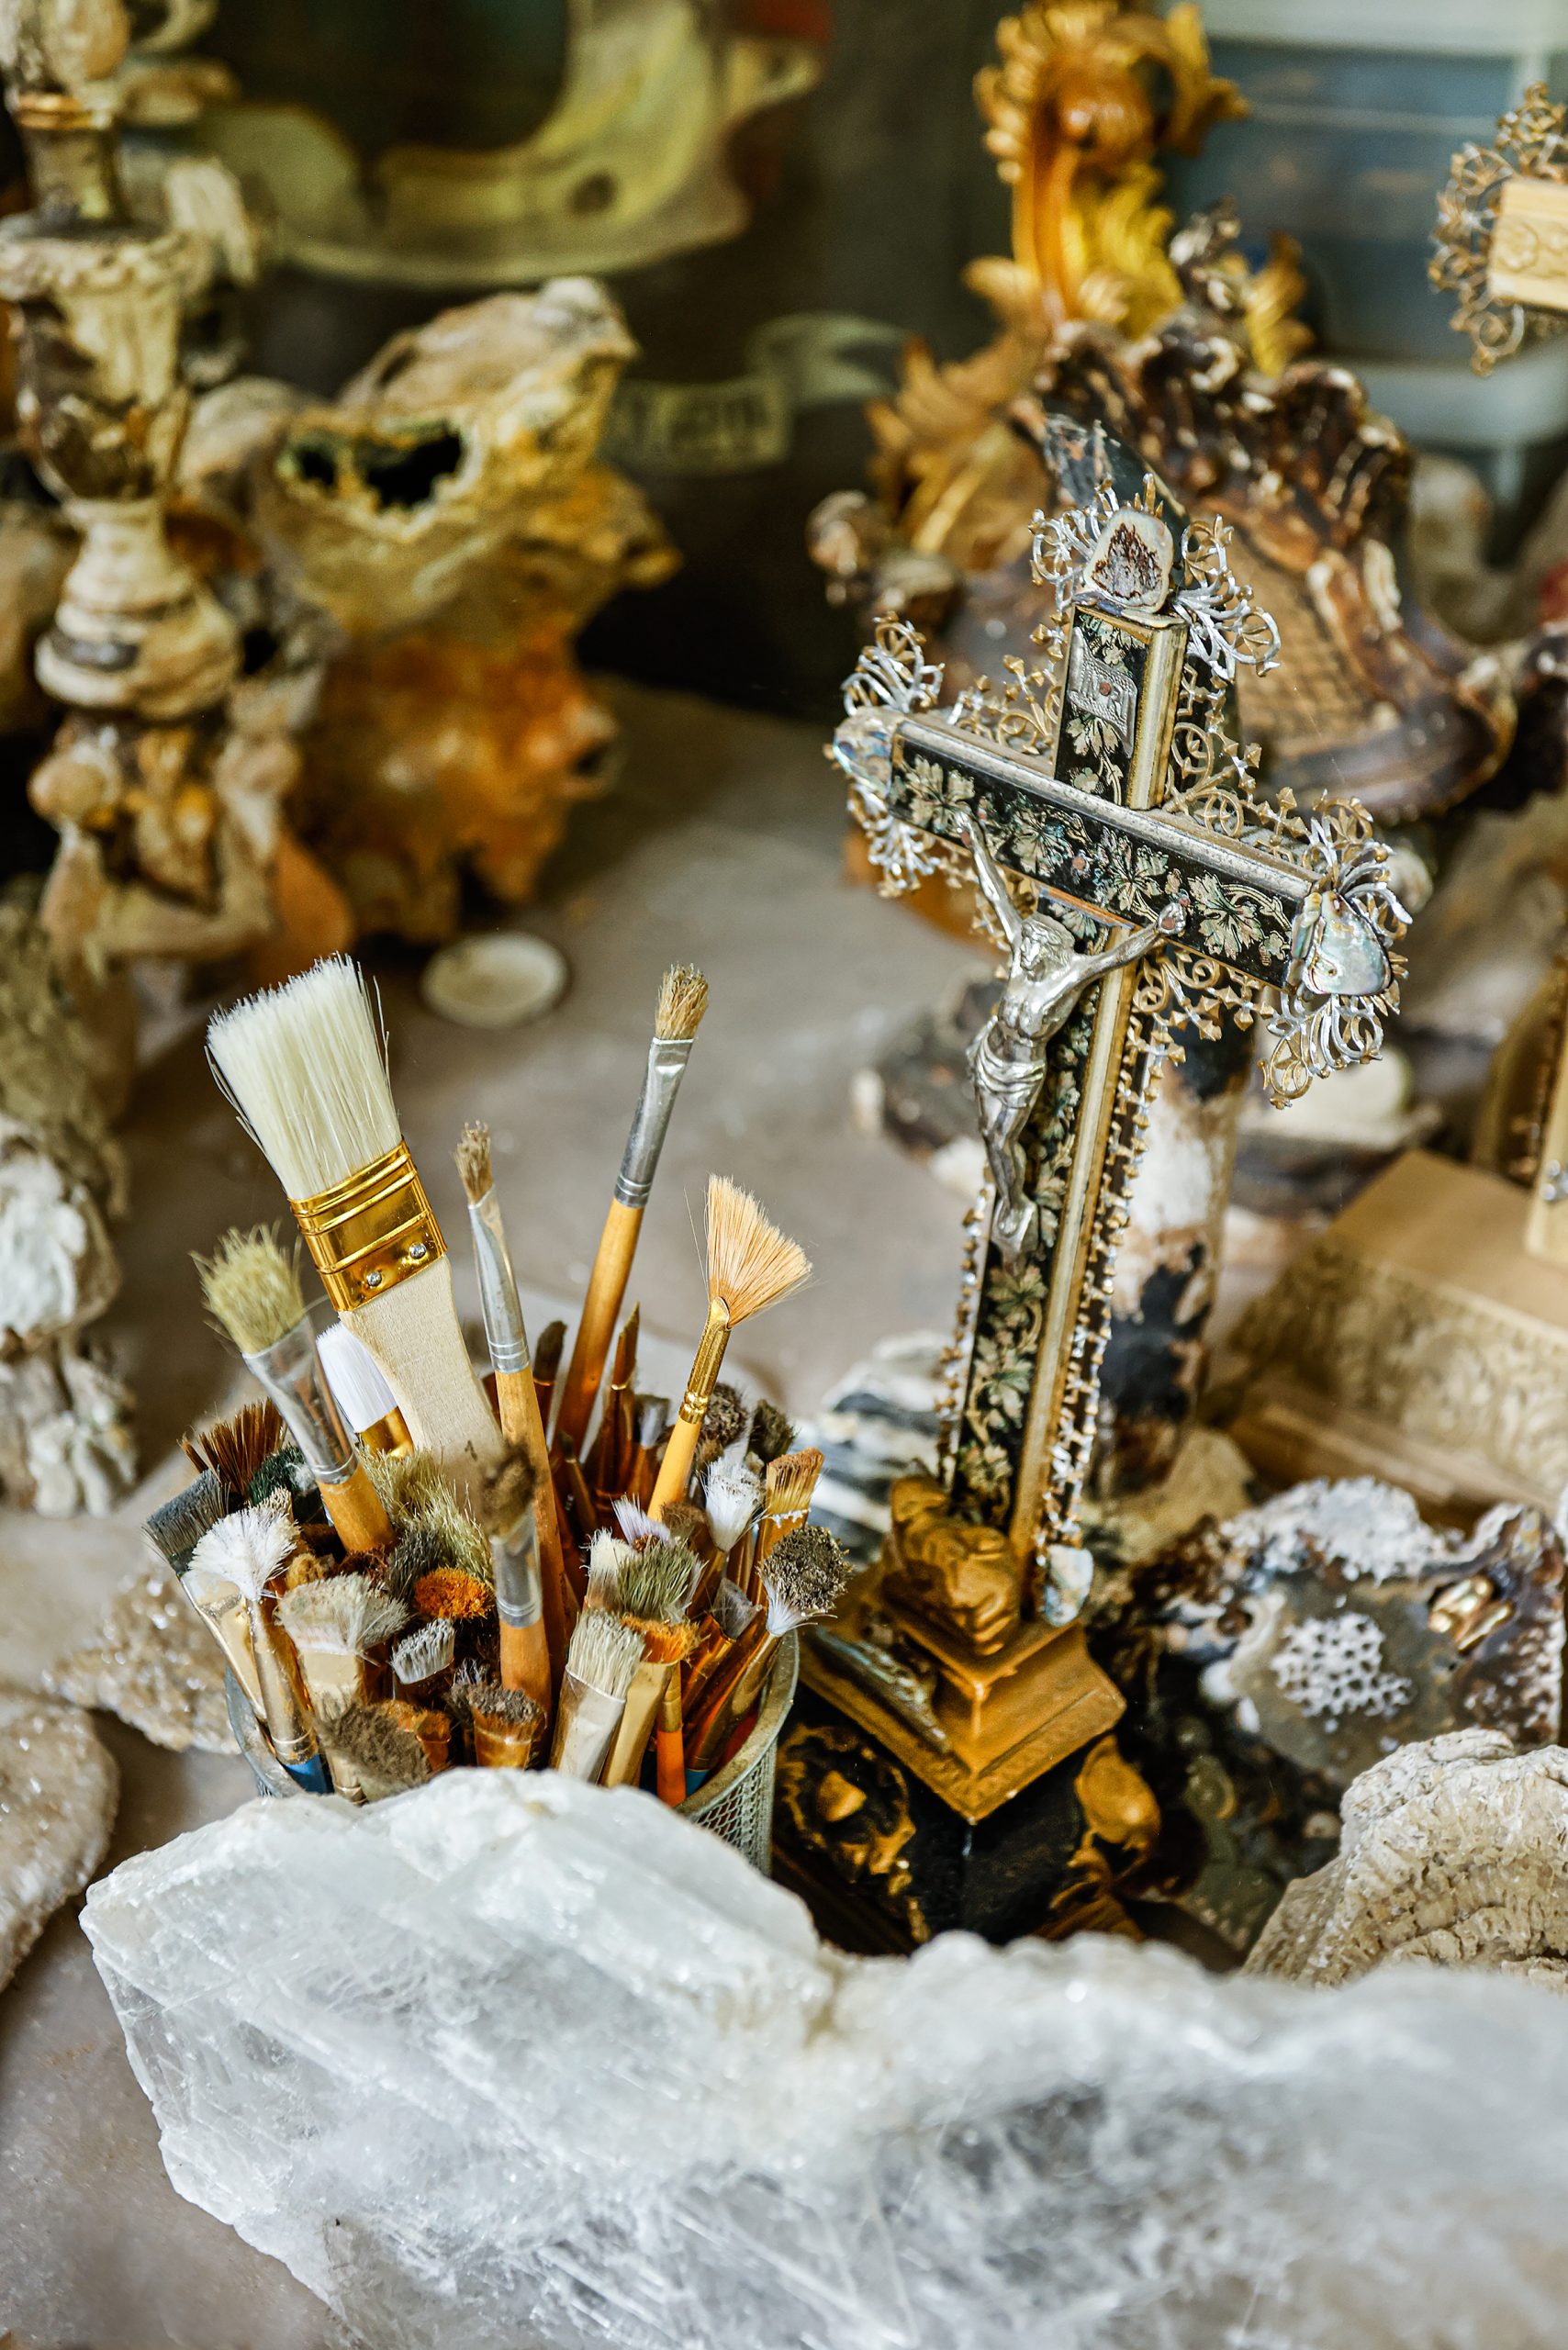 Nineteenth century French crucifix with metal filigree and a silver figure of Christ with abalone shells.